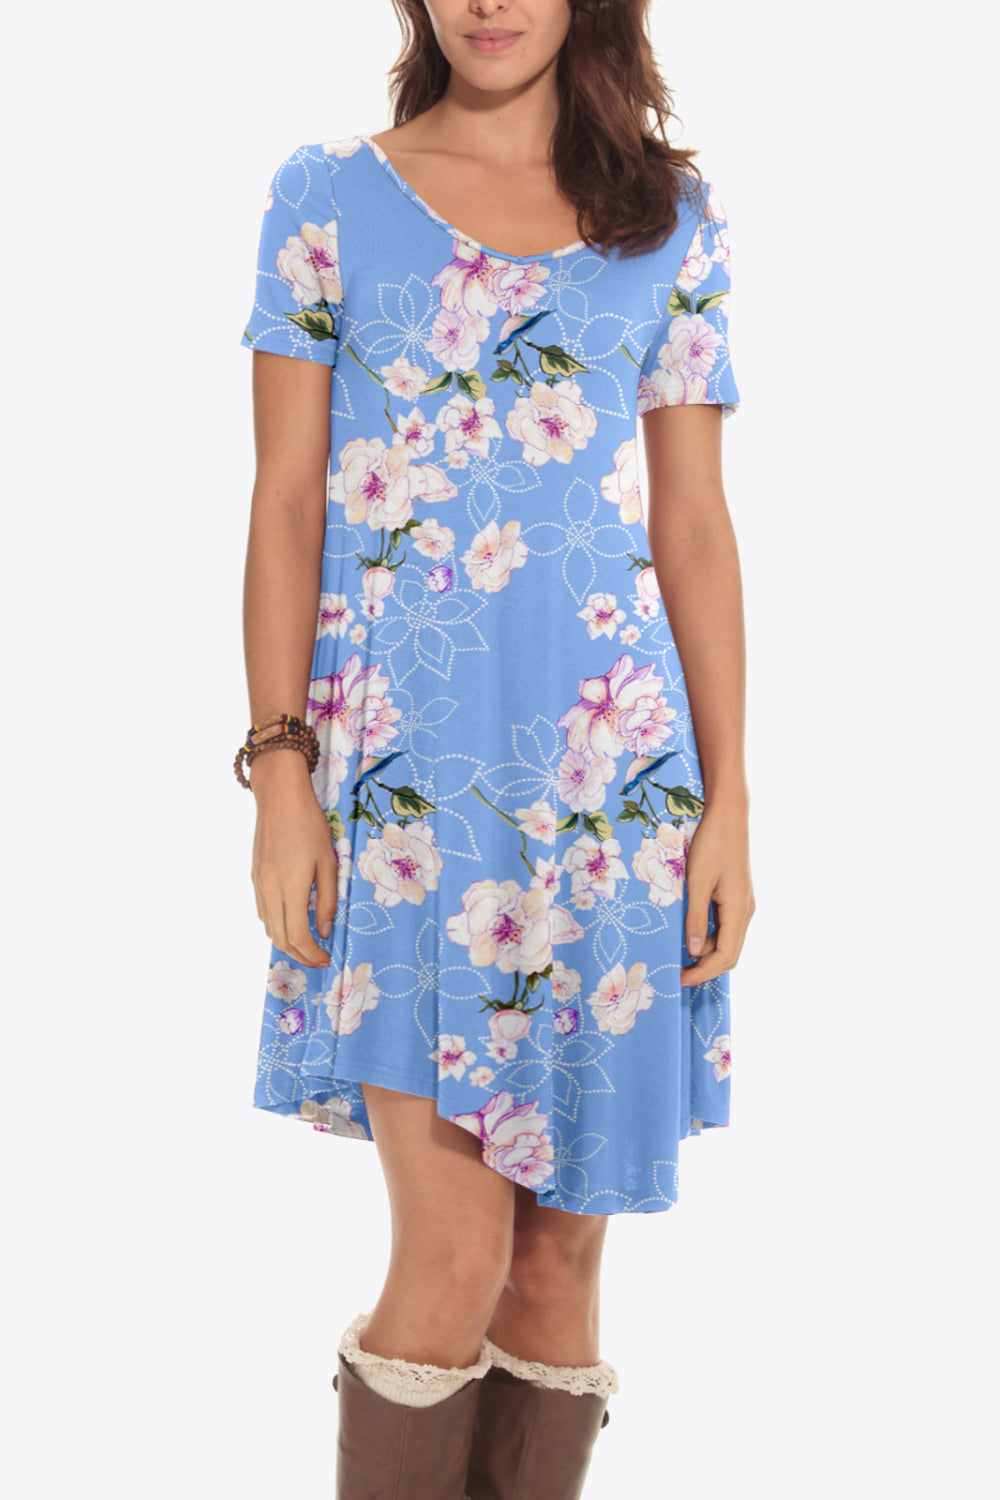 Summer Floral Round Neck Short Sleeve Dress: Perfect for Beach Weddings & Women's Party Wear